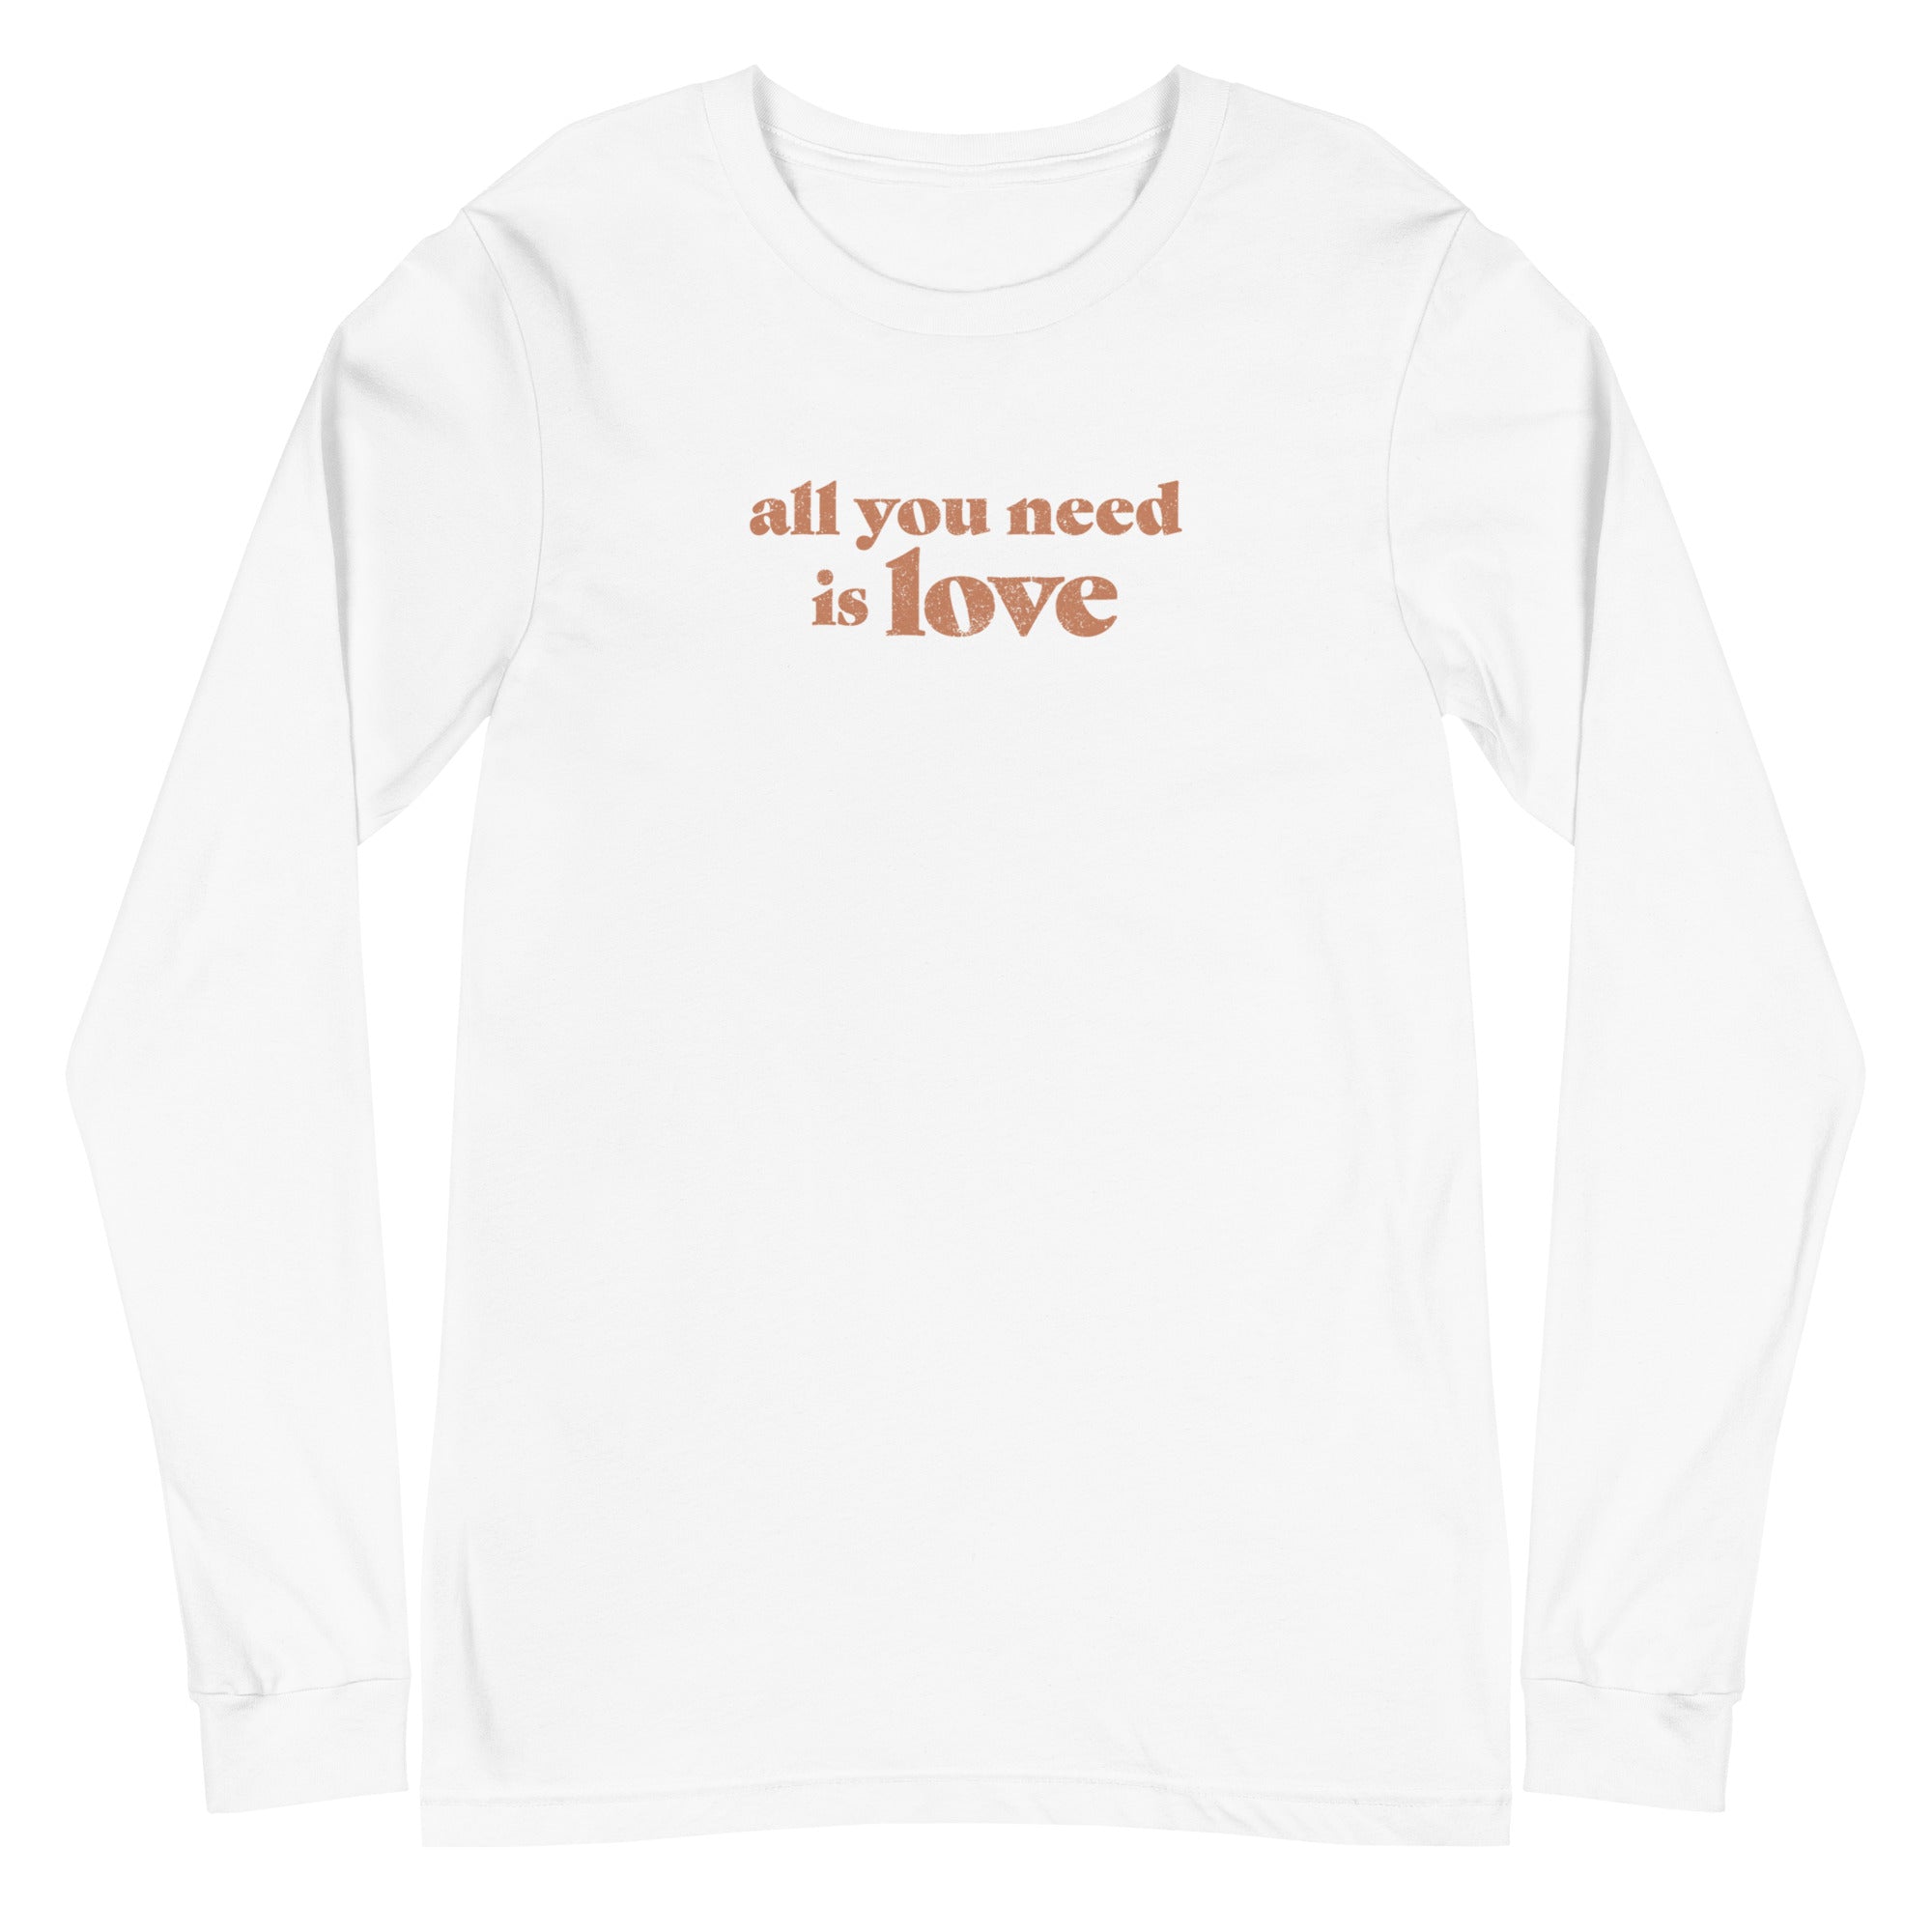 All You Need is Love White Long Sleeve Tee